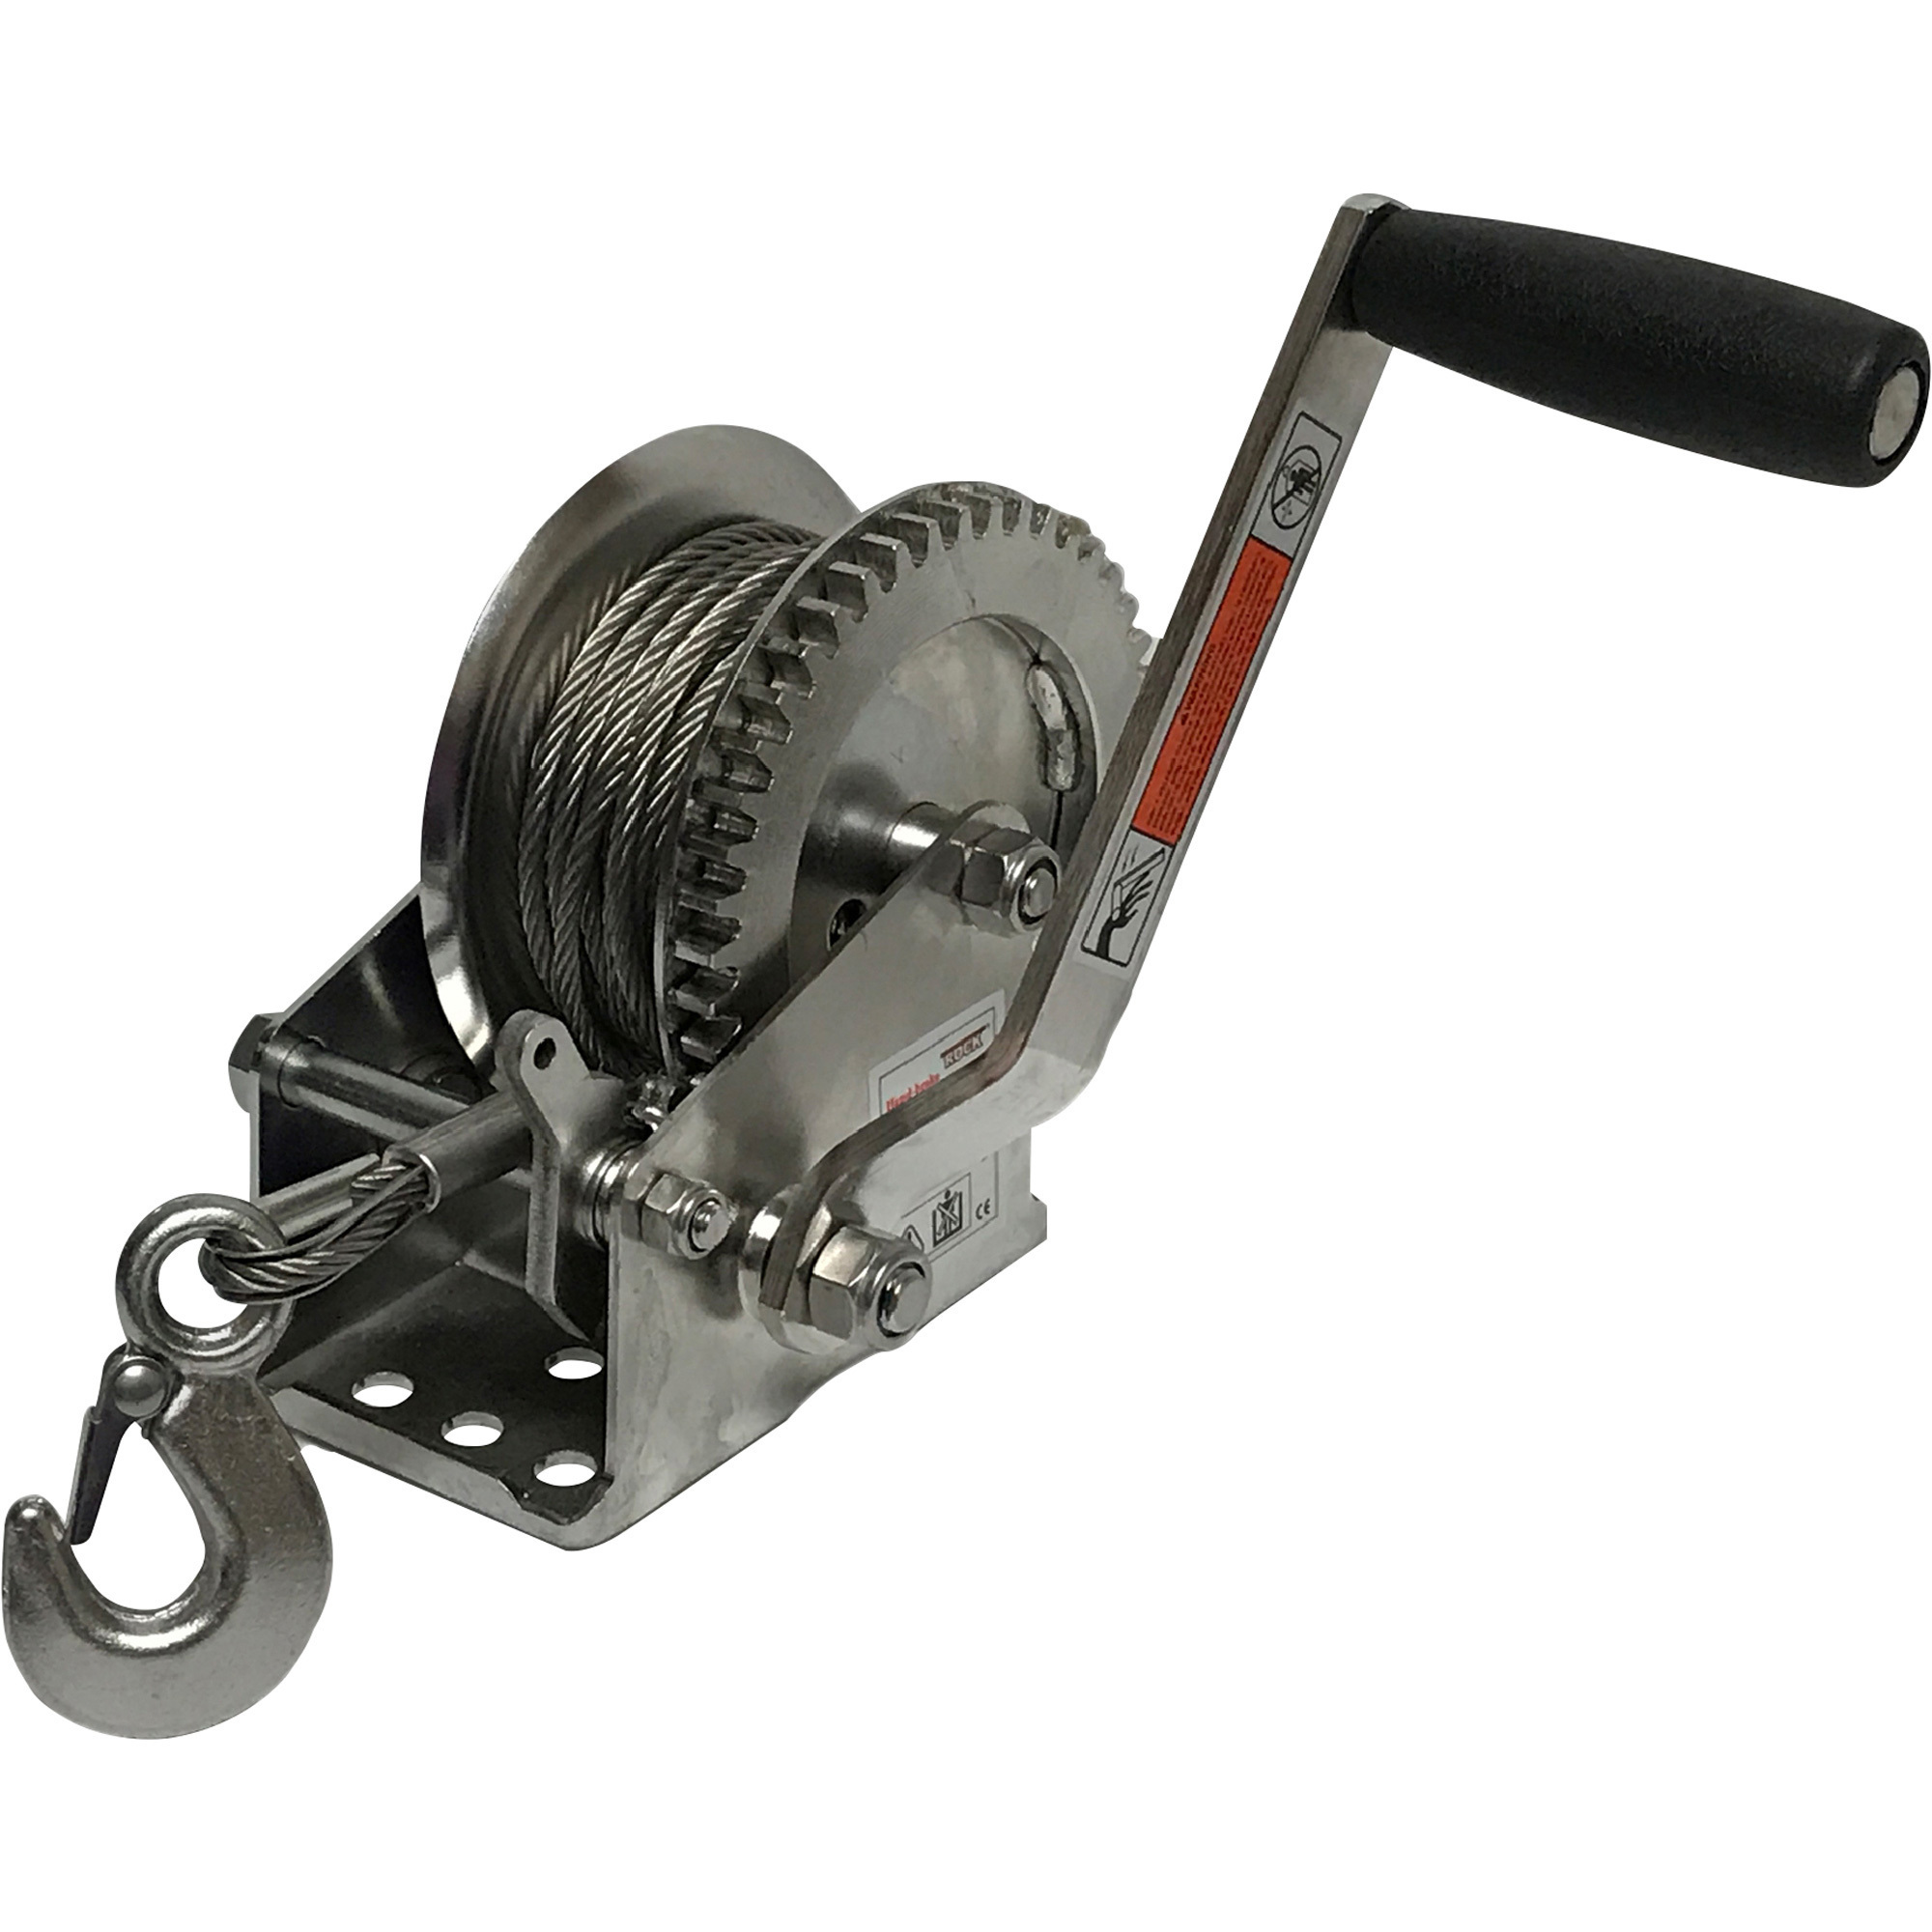 Endurance Marine Stainless Steel Hand Winch, 50ft. Wire Cable, 1400-Lb. Capacity, Manual Brake, Model EBW1400SSC